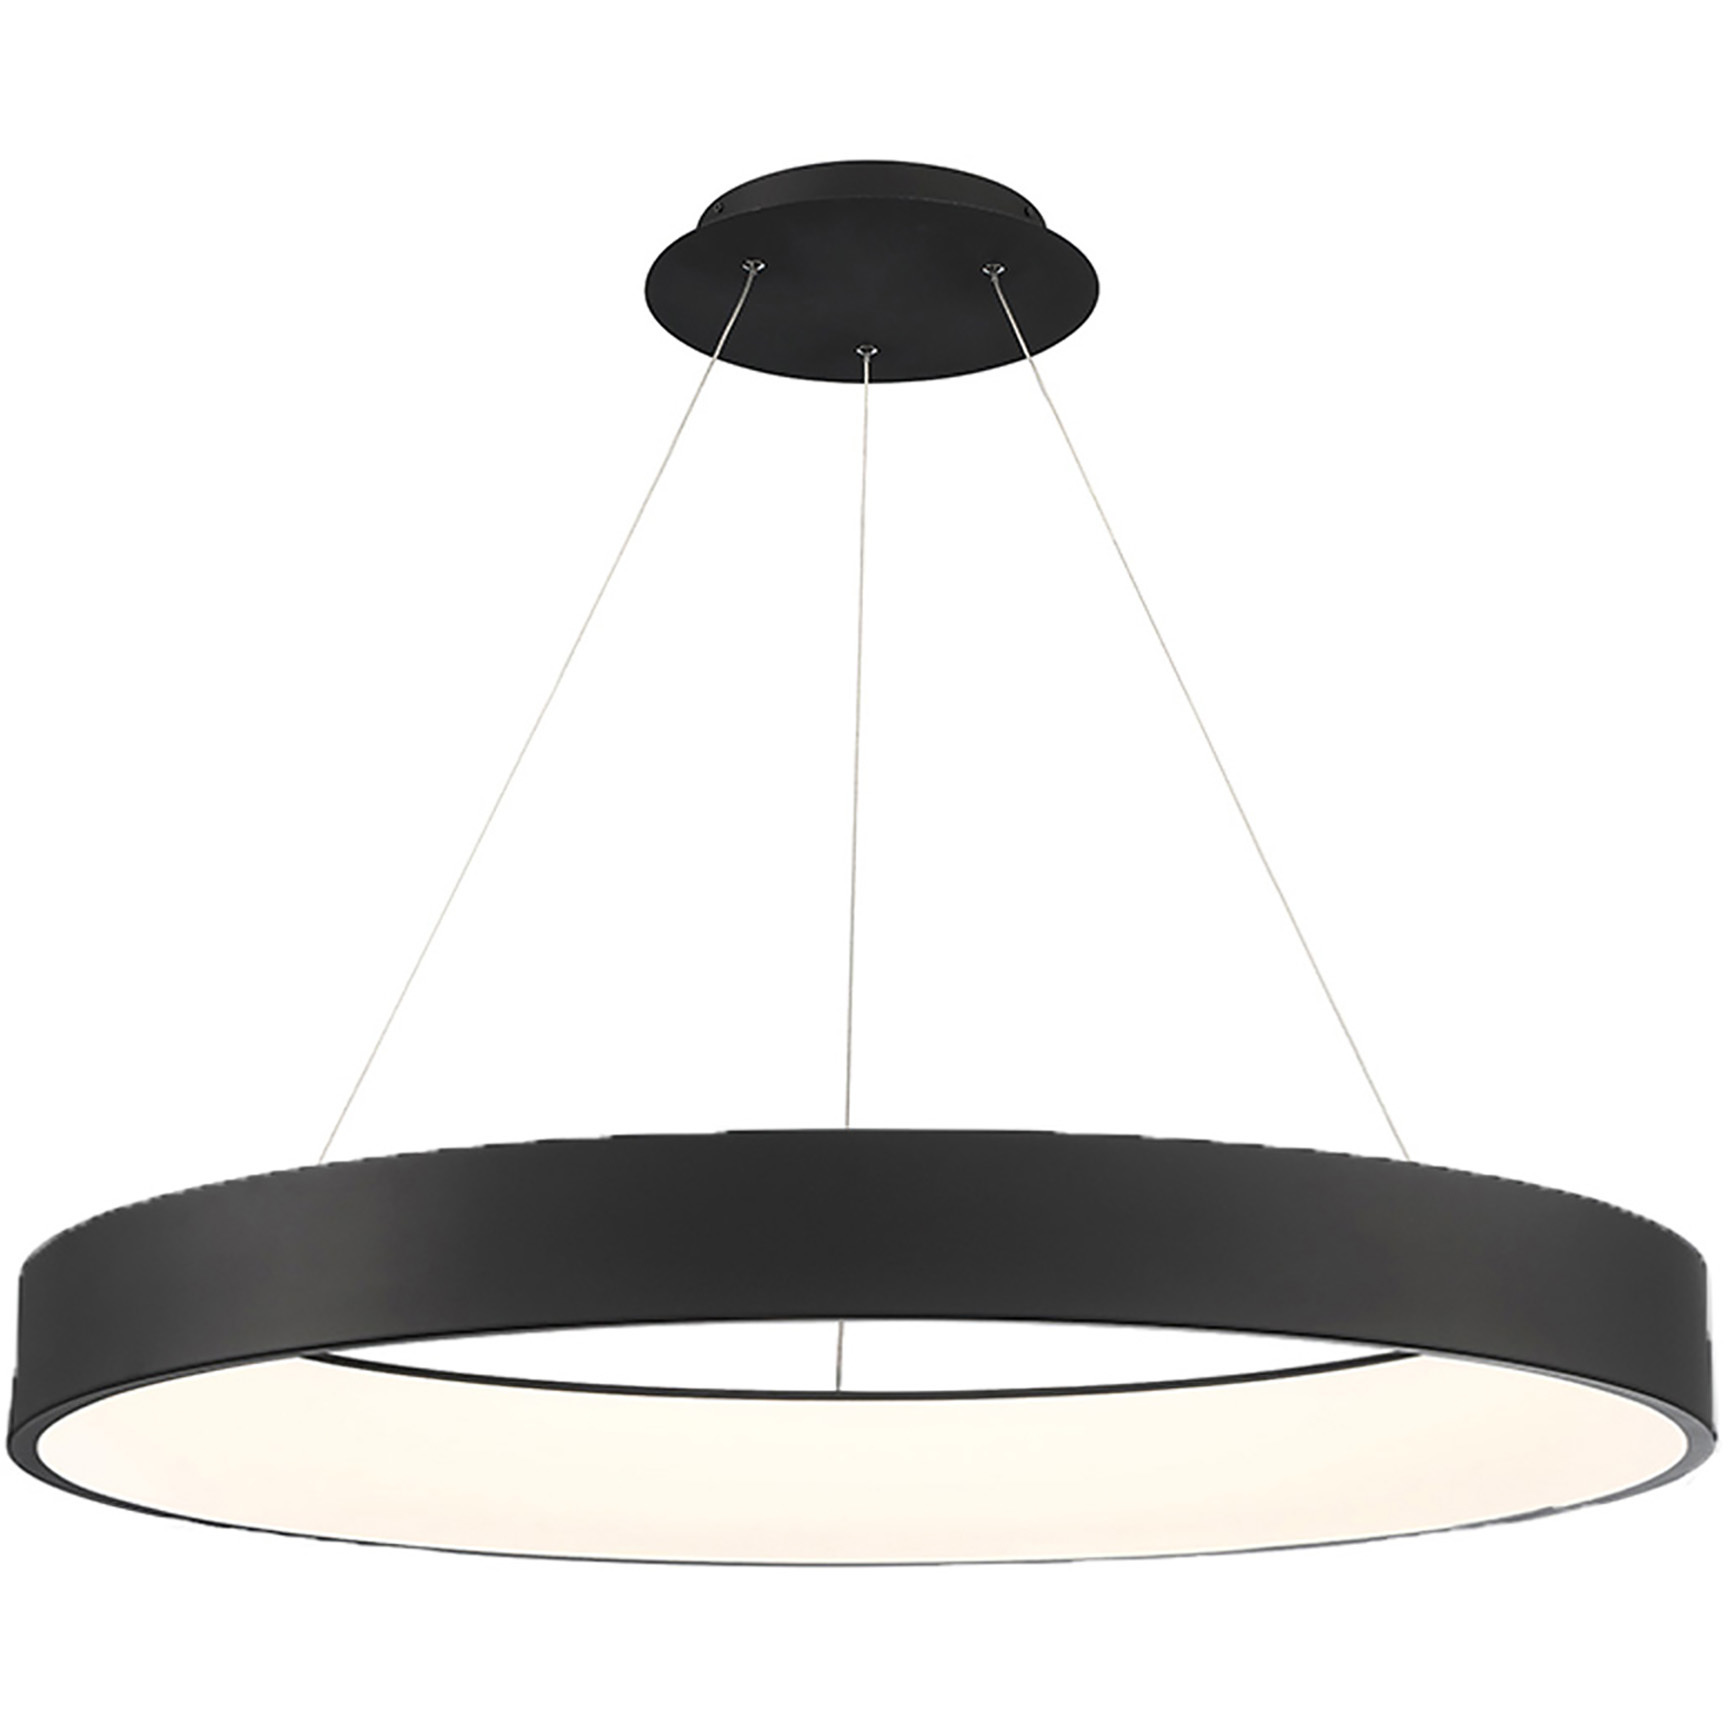 WAC Lighting PD-33743-BK Corso LED 43 inch Black Pendant Ceiling Light in  43in, dweLED